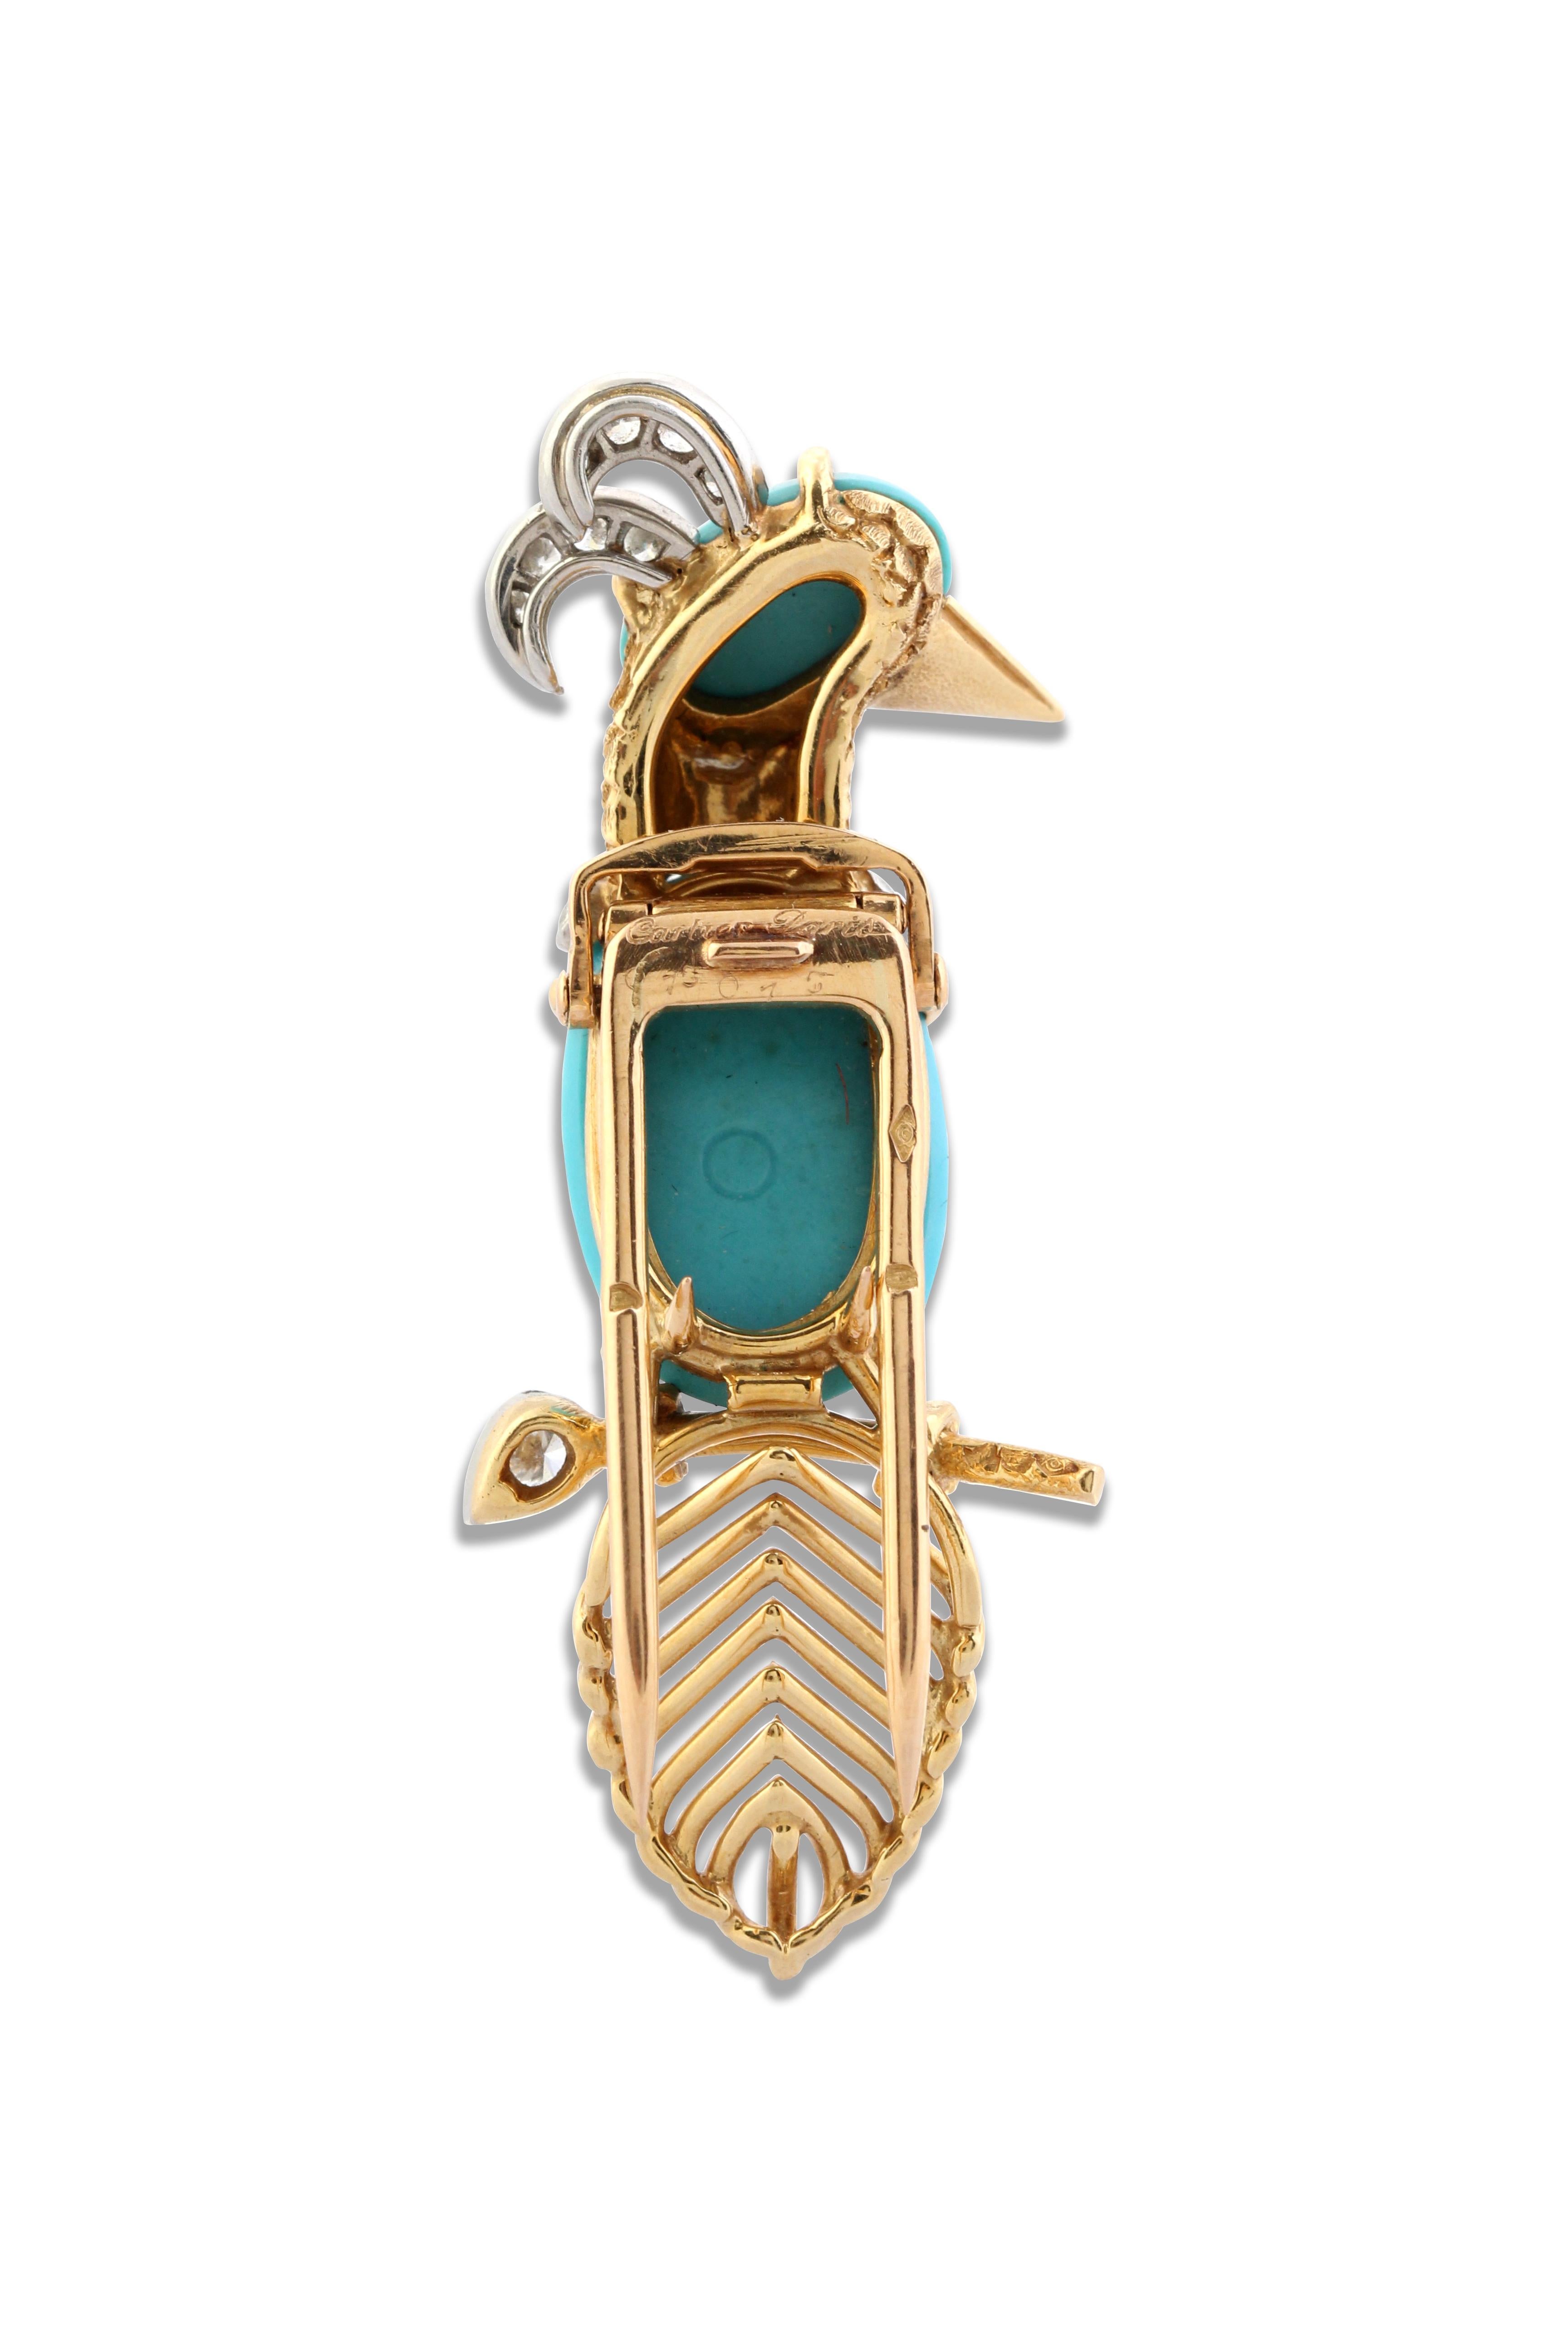 A Gold, Diamond and Turquoise Woodpecker Brooch by Cartier
A yellow gold, diamond and turquoise woodpecker bird brooch with additional platinum details. Total diamond weight =  0.40 carats. Length = 5 cm, Width = 2 cm. Signed and marked Cartier